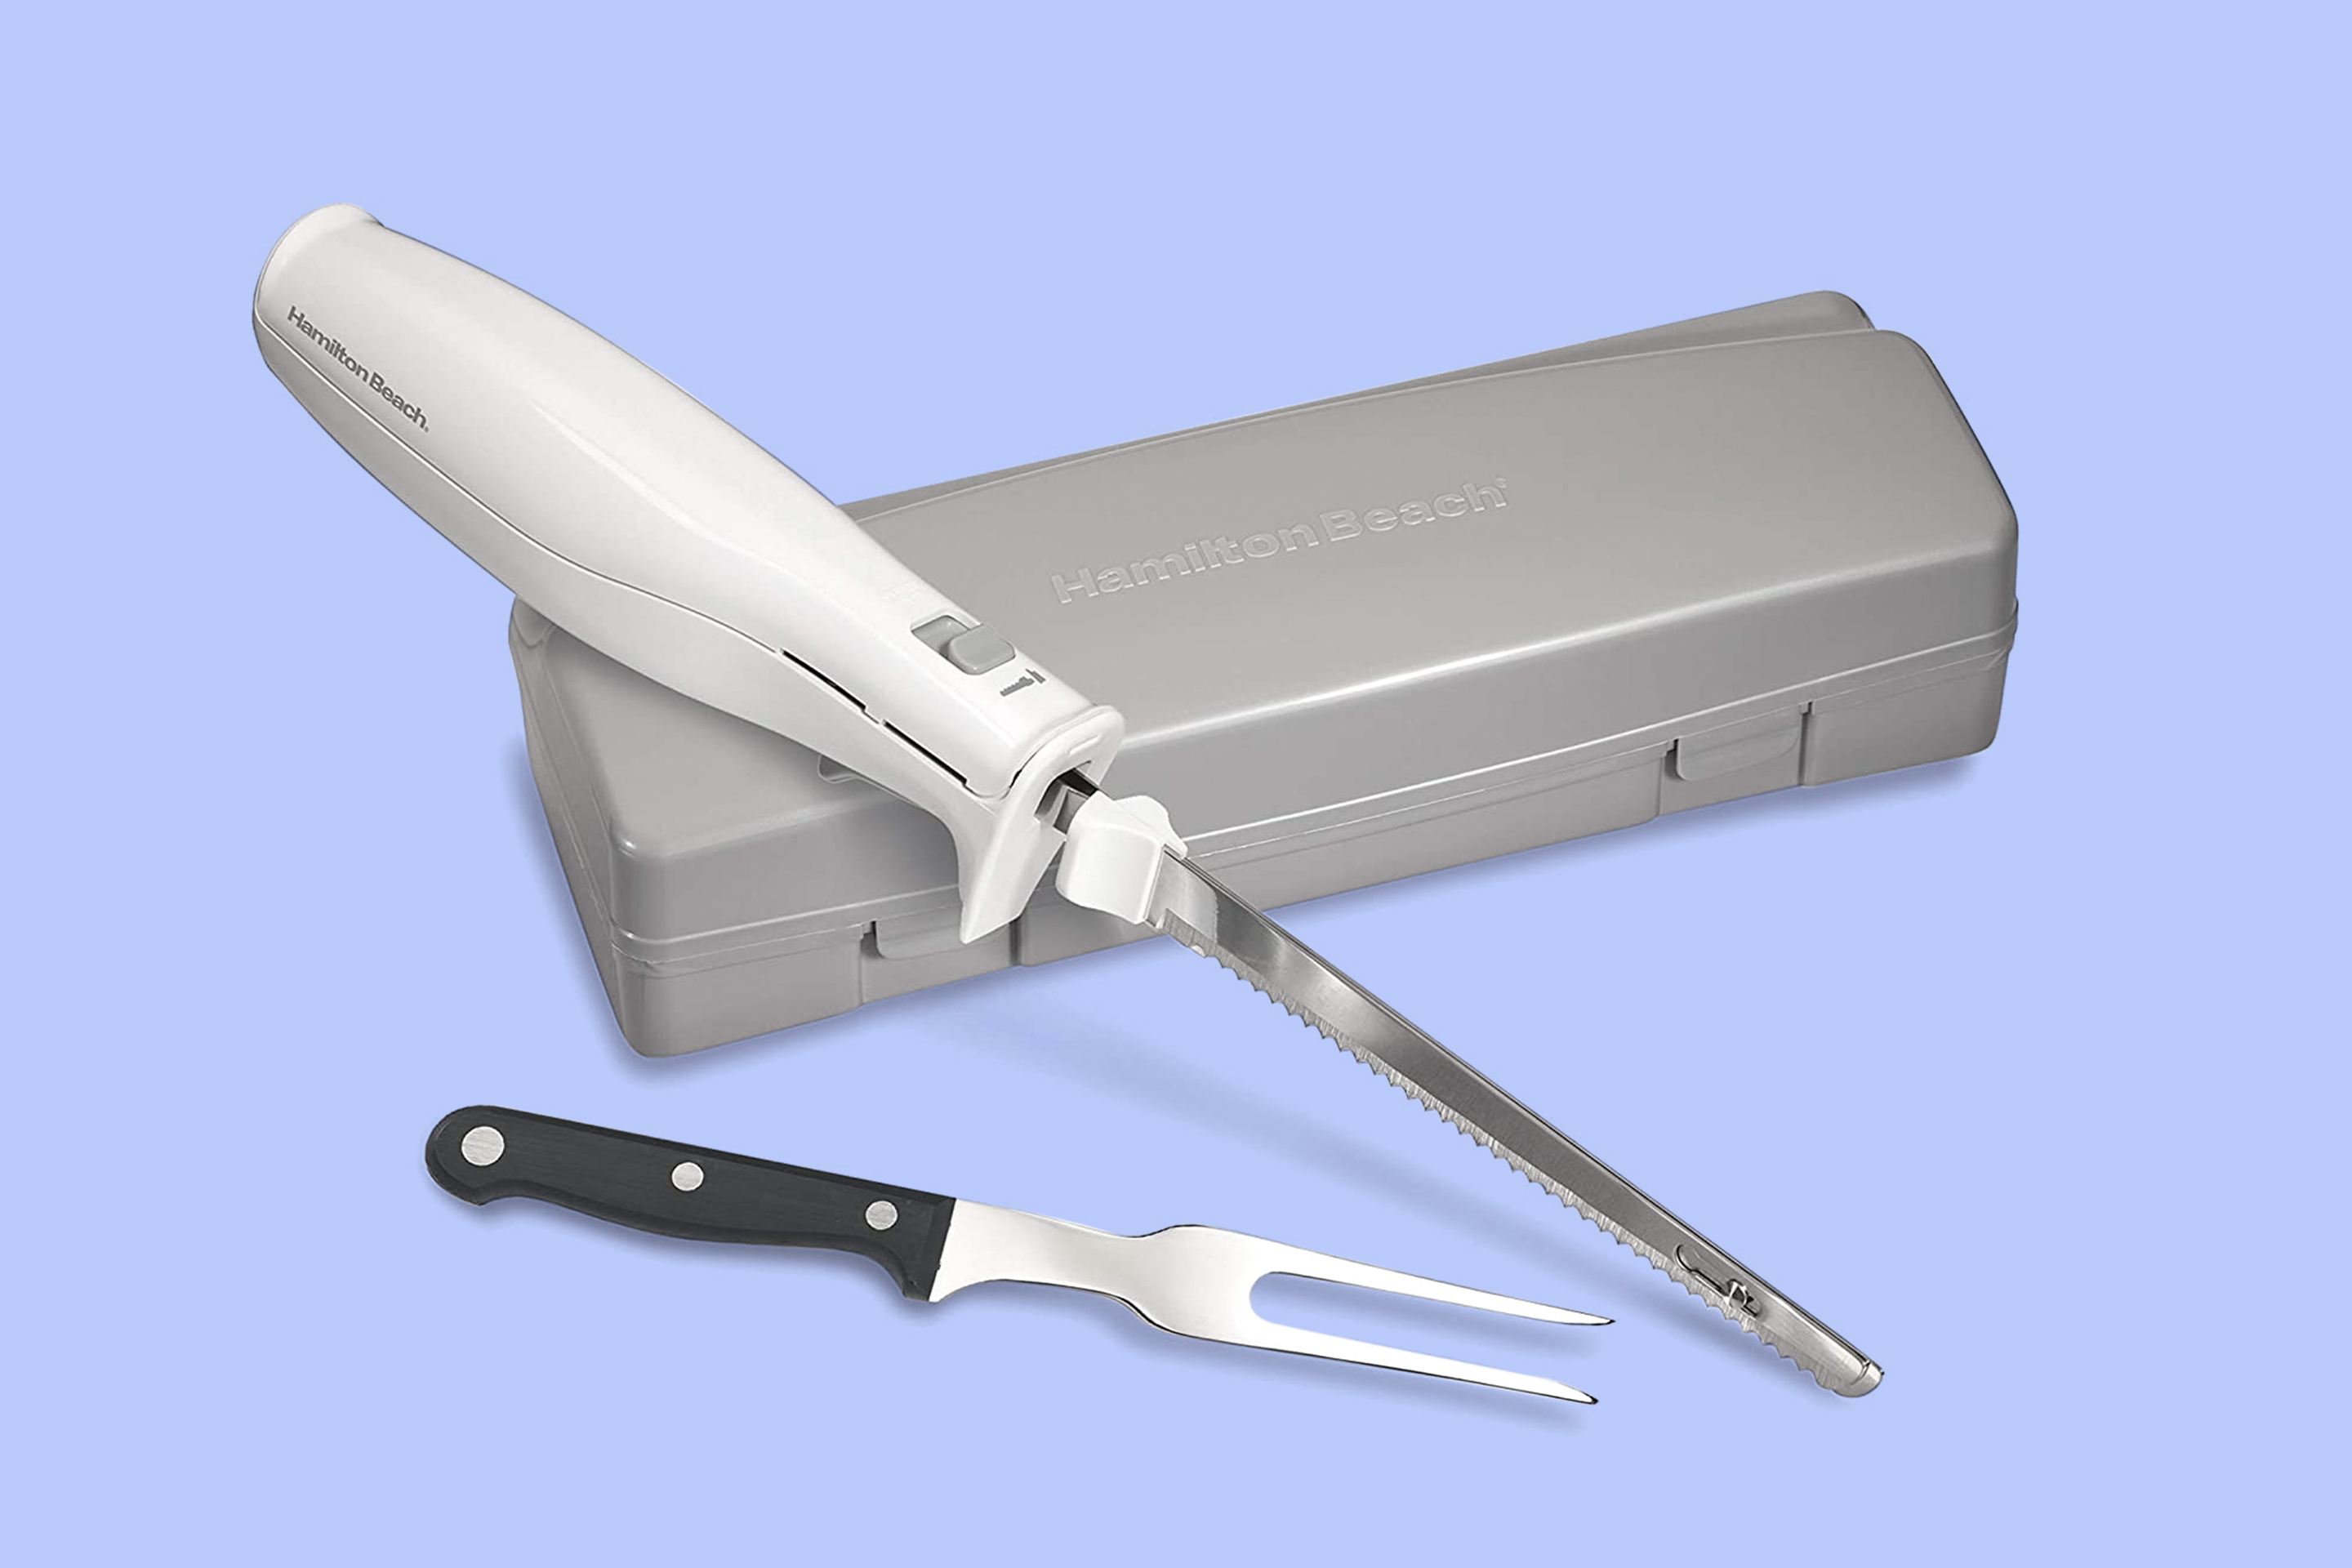 The Best Electric Knife for Your Money